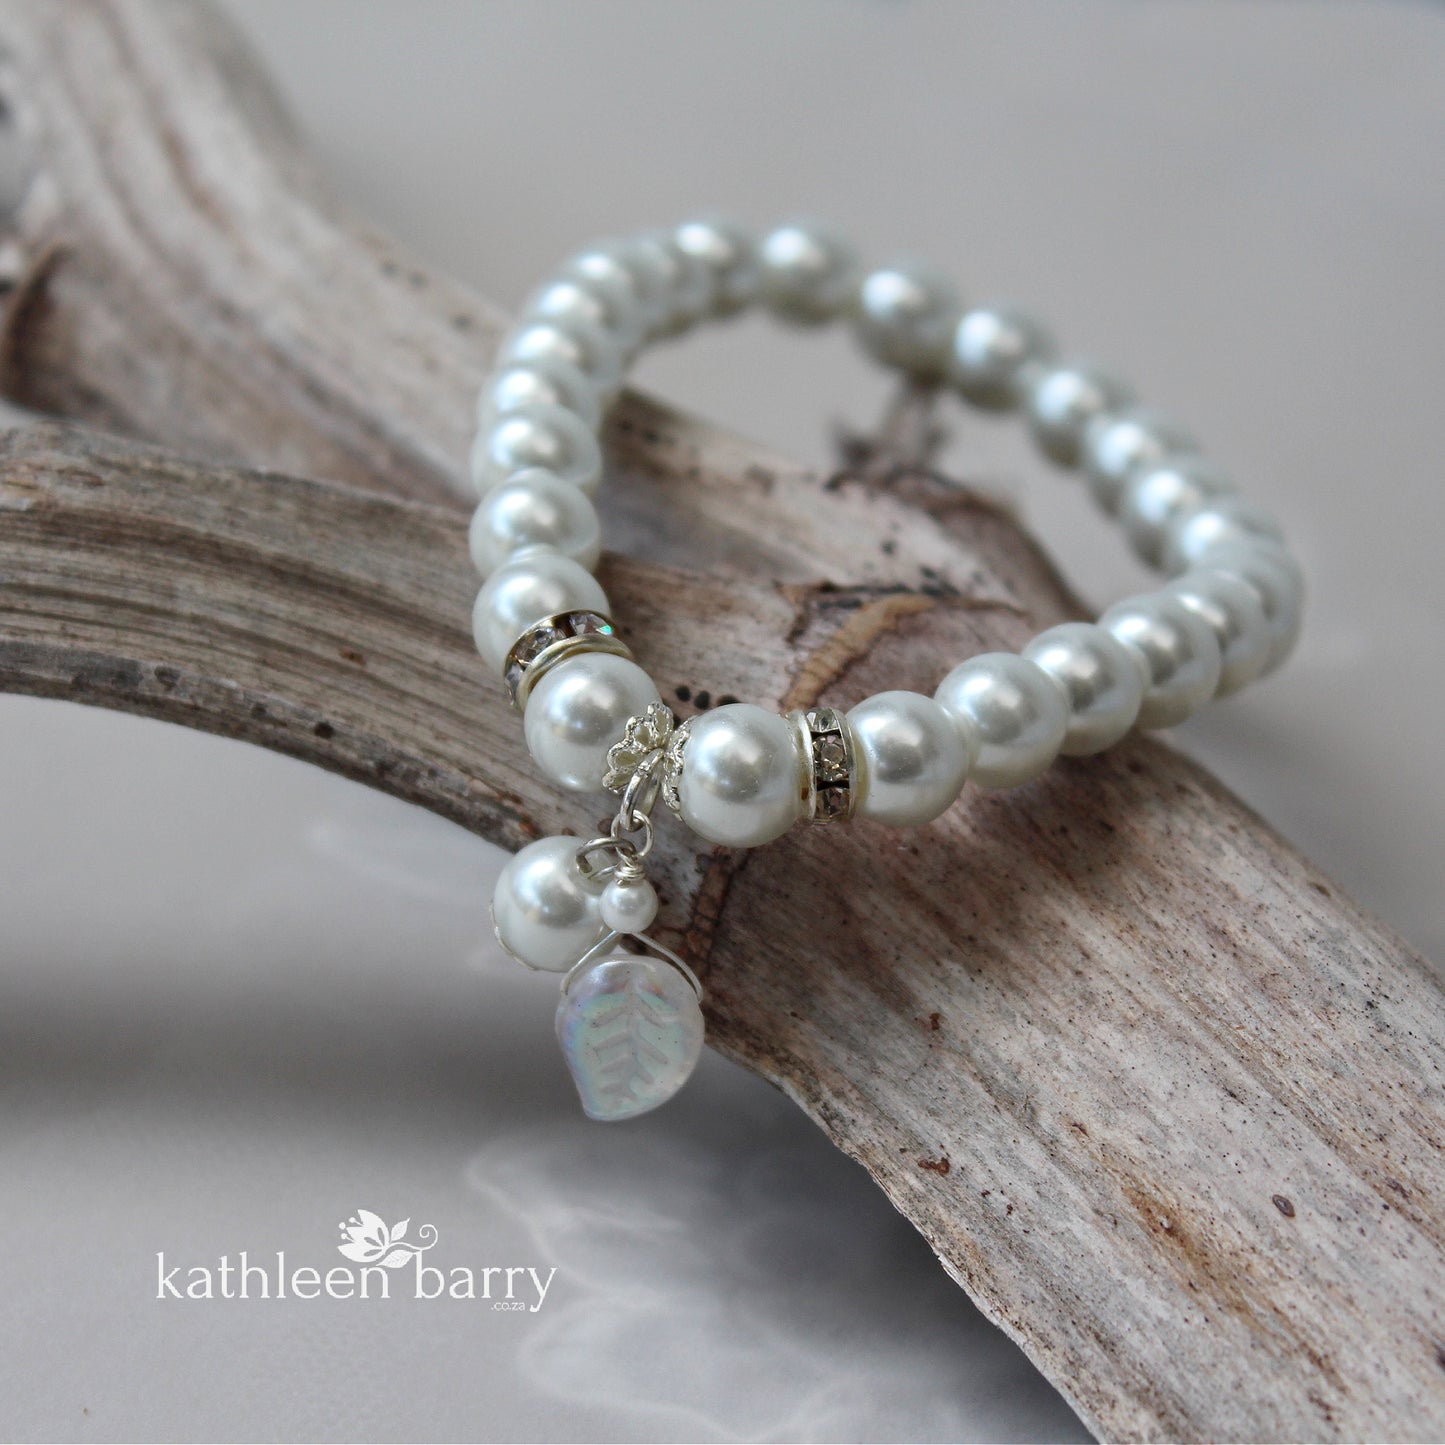 Silver and pearl bracelets Bride or Bridesmaid gift available in White, Ivory/cream or blush pink